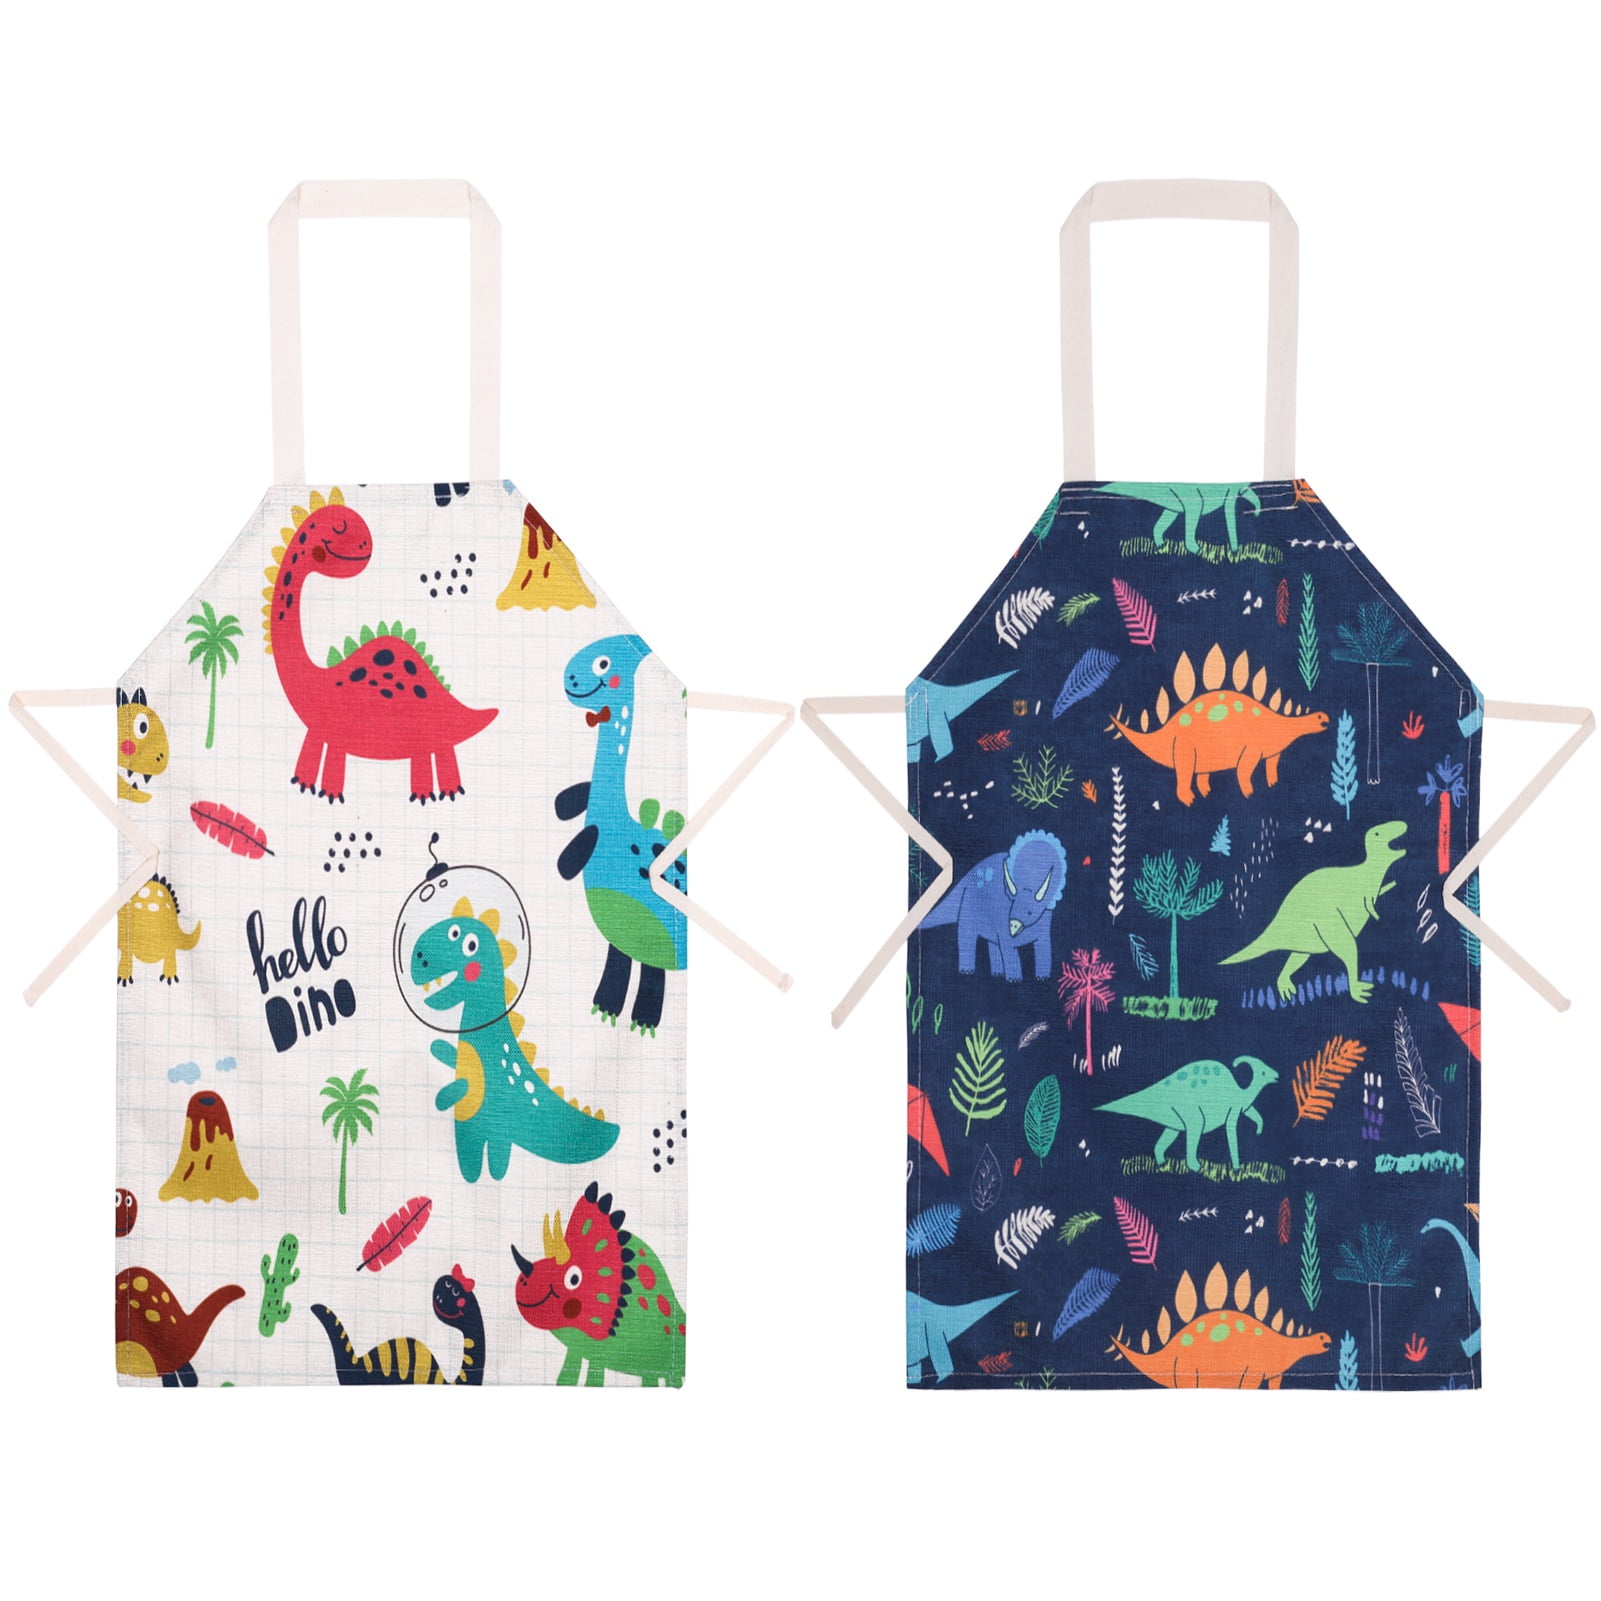 Kids Apron for Painting Children Painting Apron Kids Play Apron Waterproof  Cooking Apron with Big Pockets For Children Age 6+ 